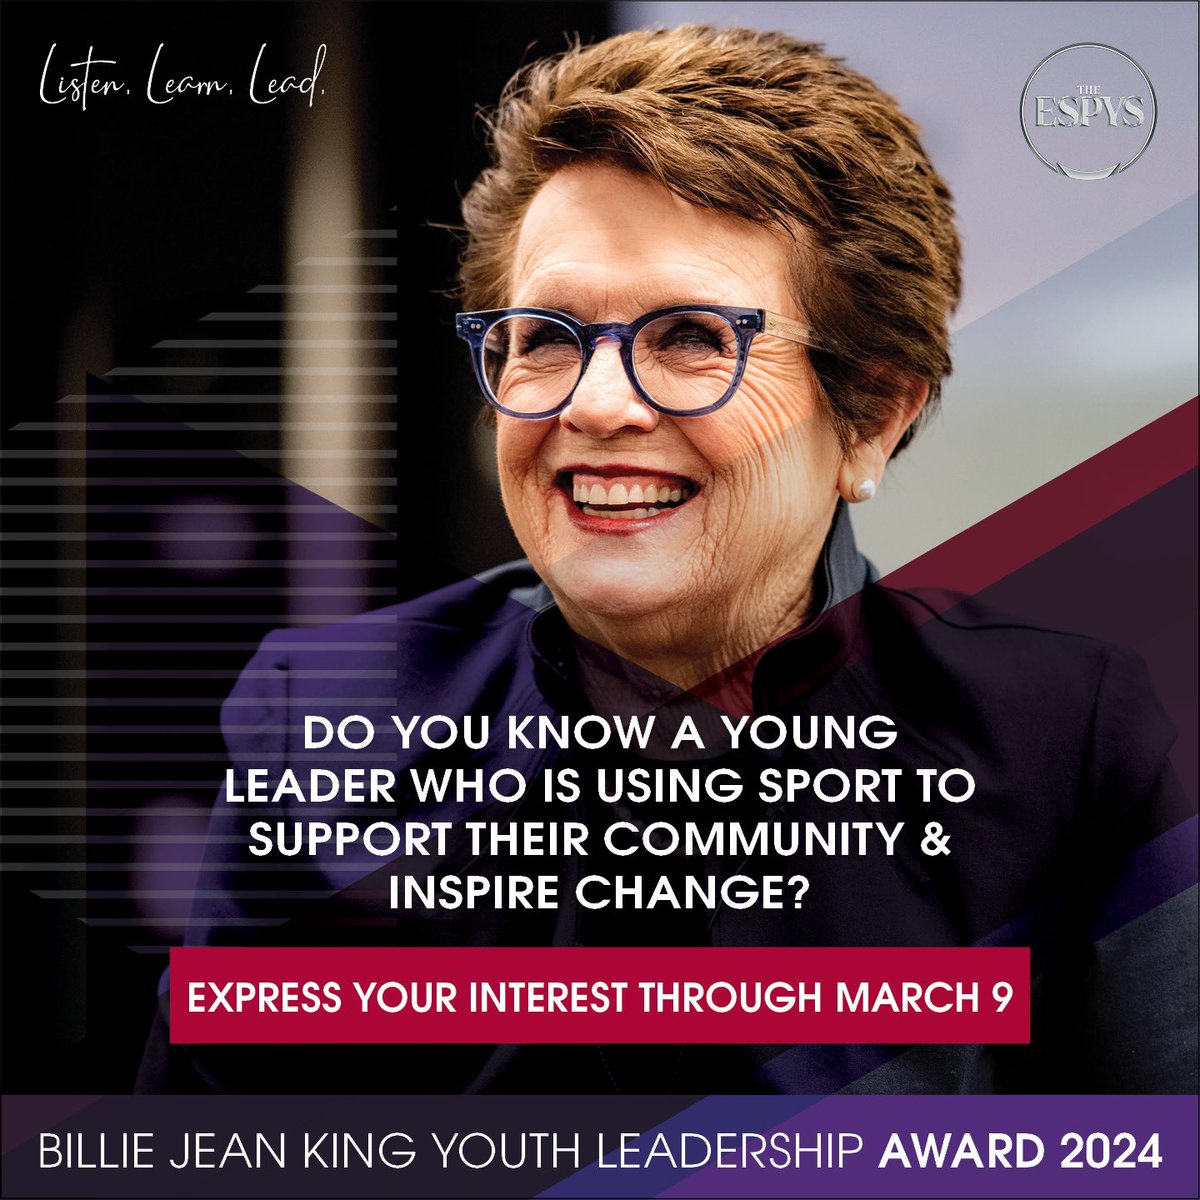 ESPN is seeking 20 Regional Honorees, alongside 3 National Honorees, to honor with the Billie Jean King Youth Leadership Award. Do you know someone who is using sports to improve their community? Learn more: bit.ly/49iLB9M. Applications must be received by 3/9/24.